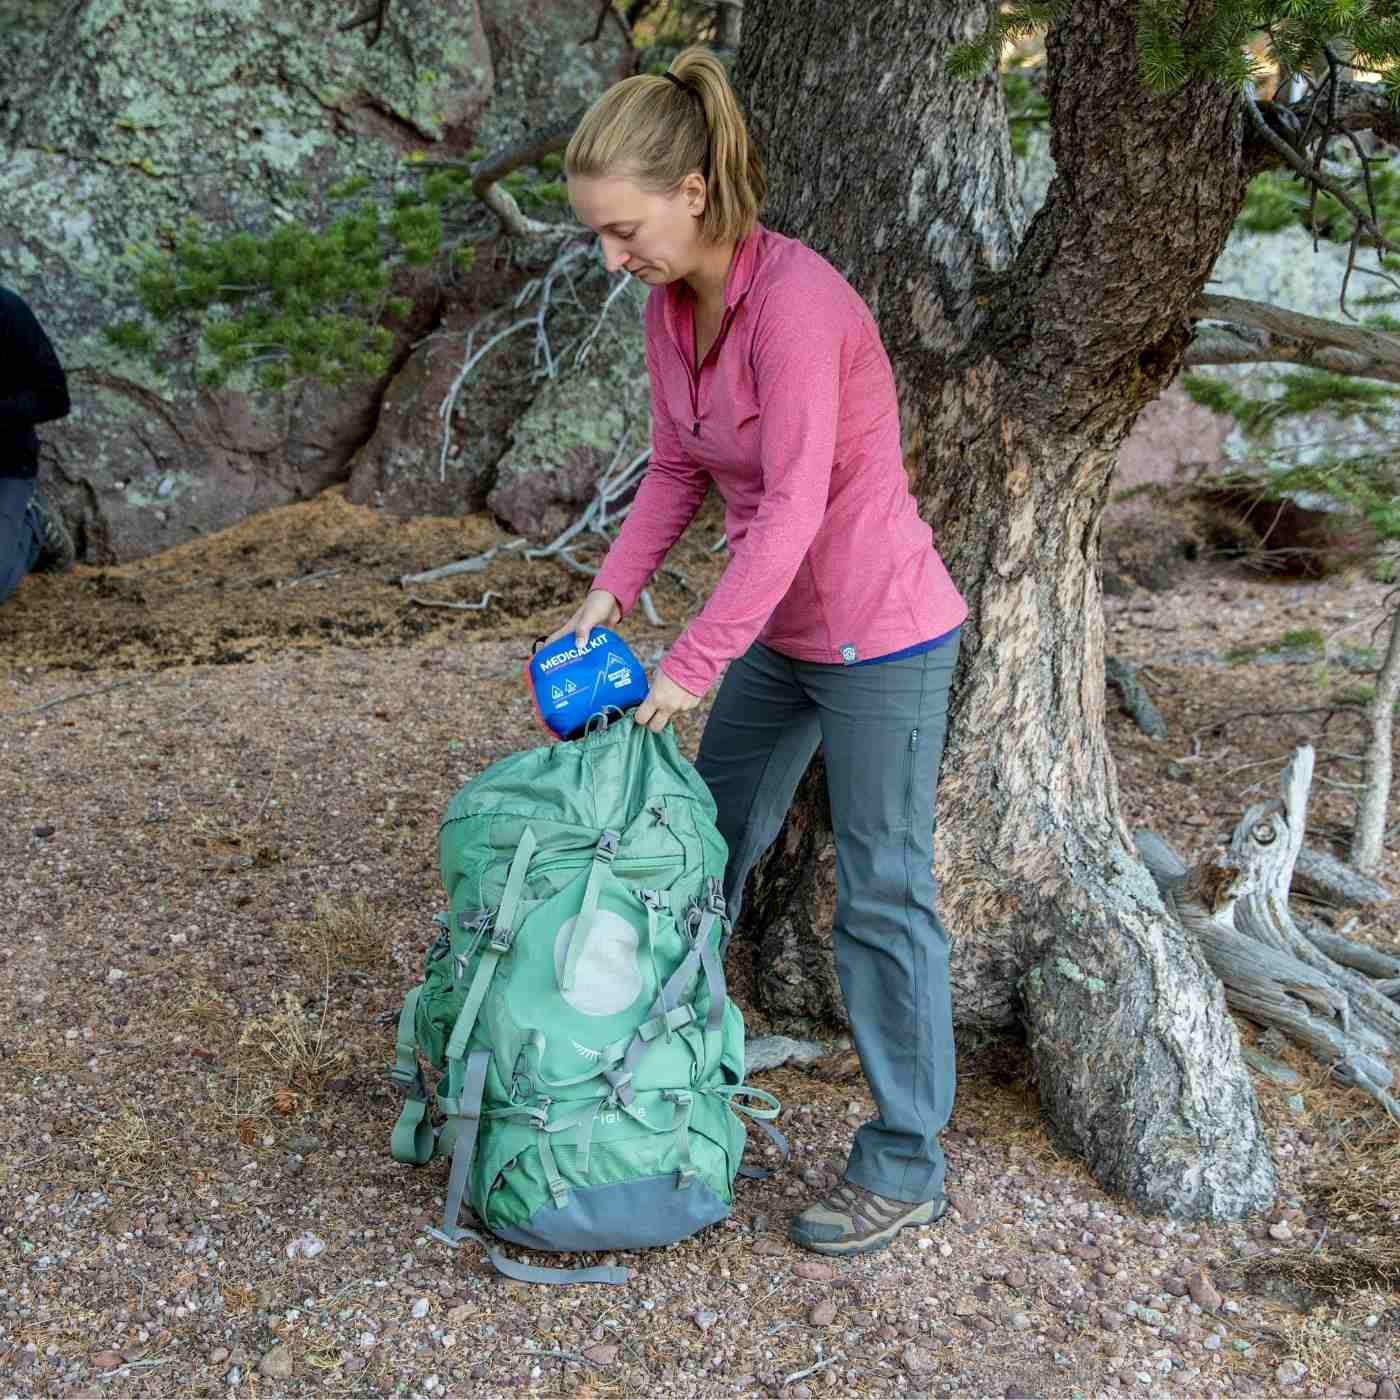 Mountain Series Medical Kit - Hiker woman in pink shirt pulling kit from green back in front of tree